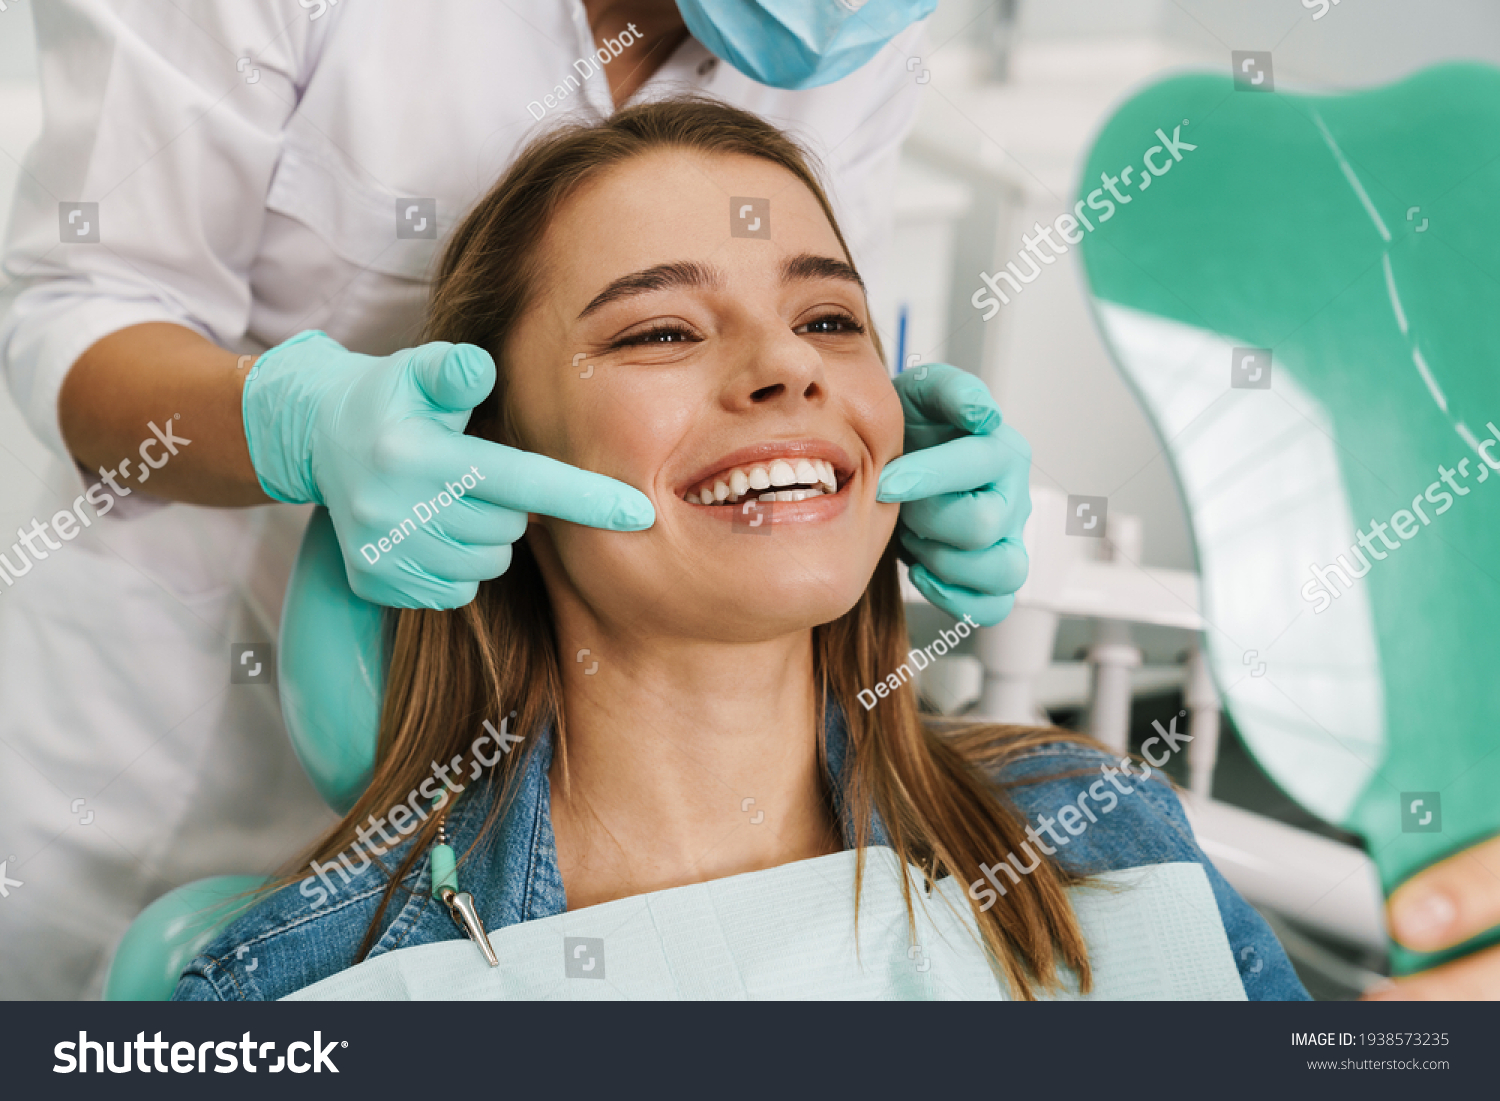 European young woman smiling while looking at mirror in dental clinic #1938573235